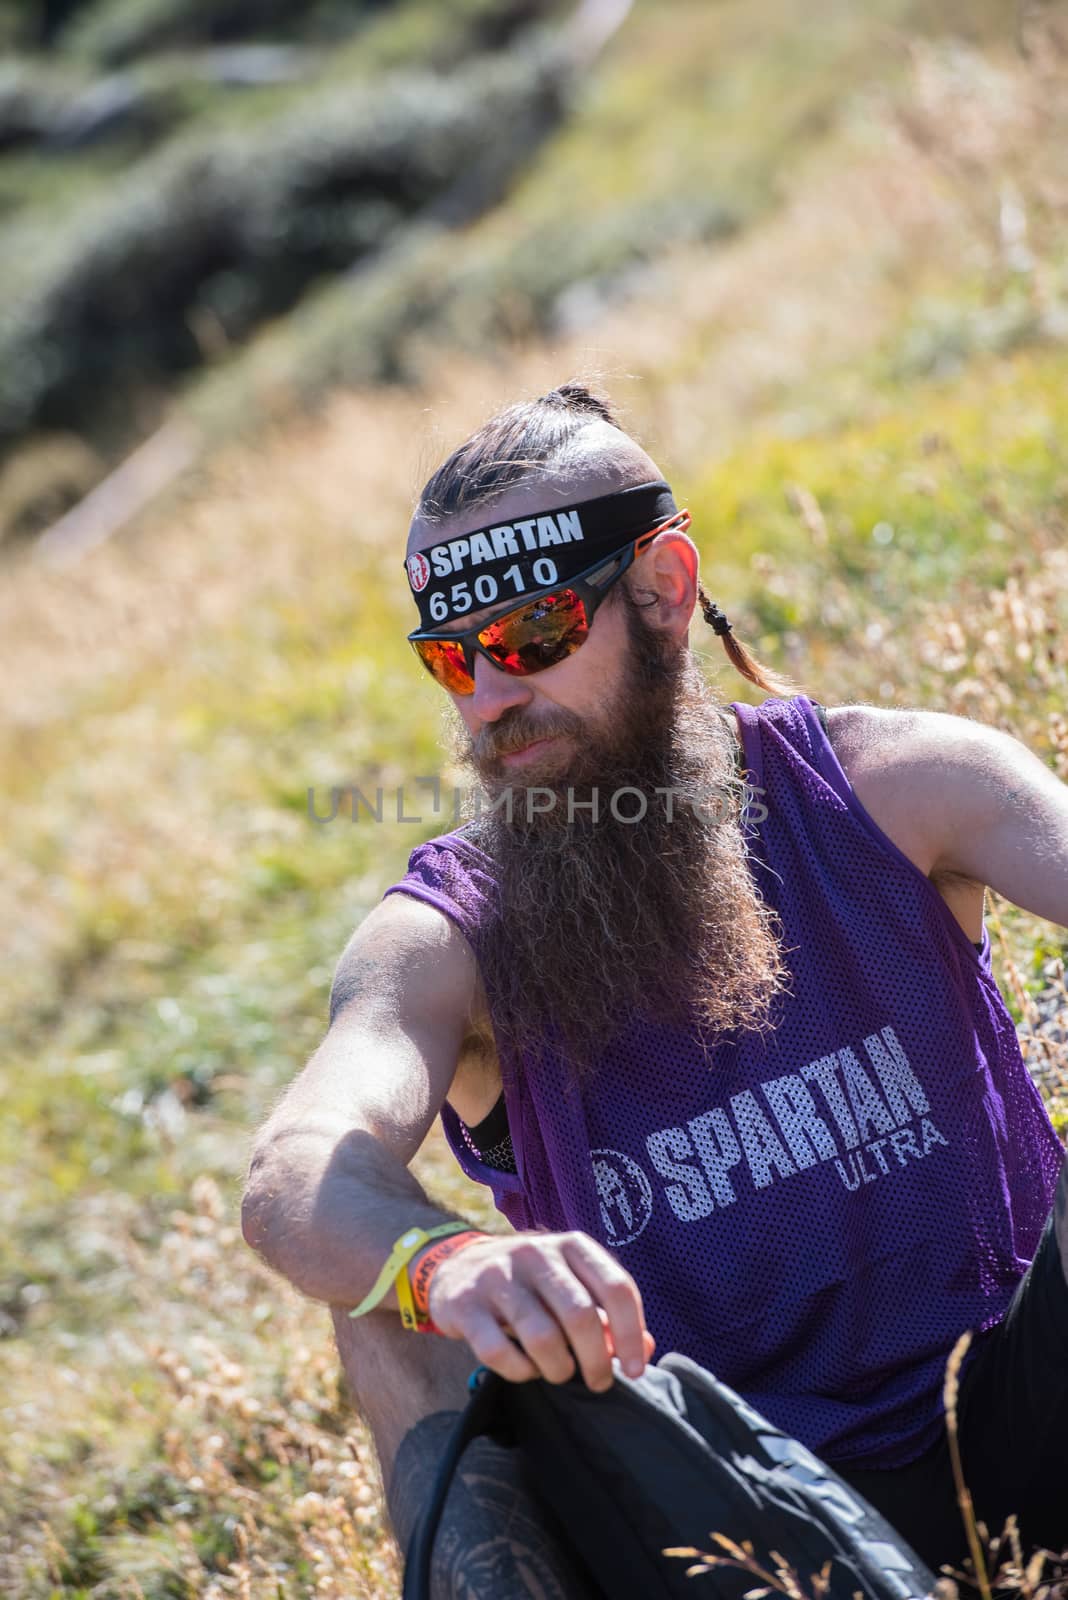 Competitors participate in the 2020 Spartan Race obstacle racing by martinscphoto